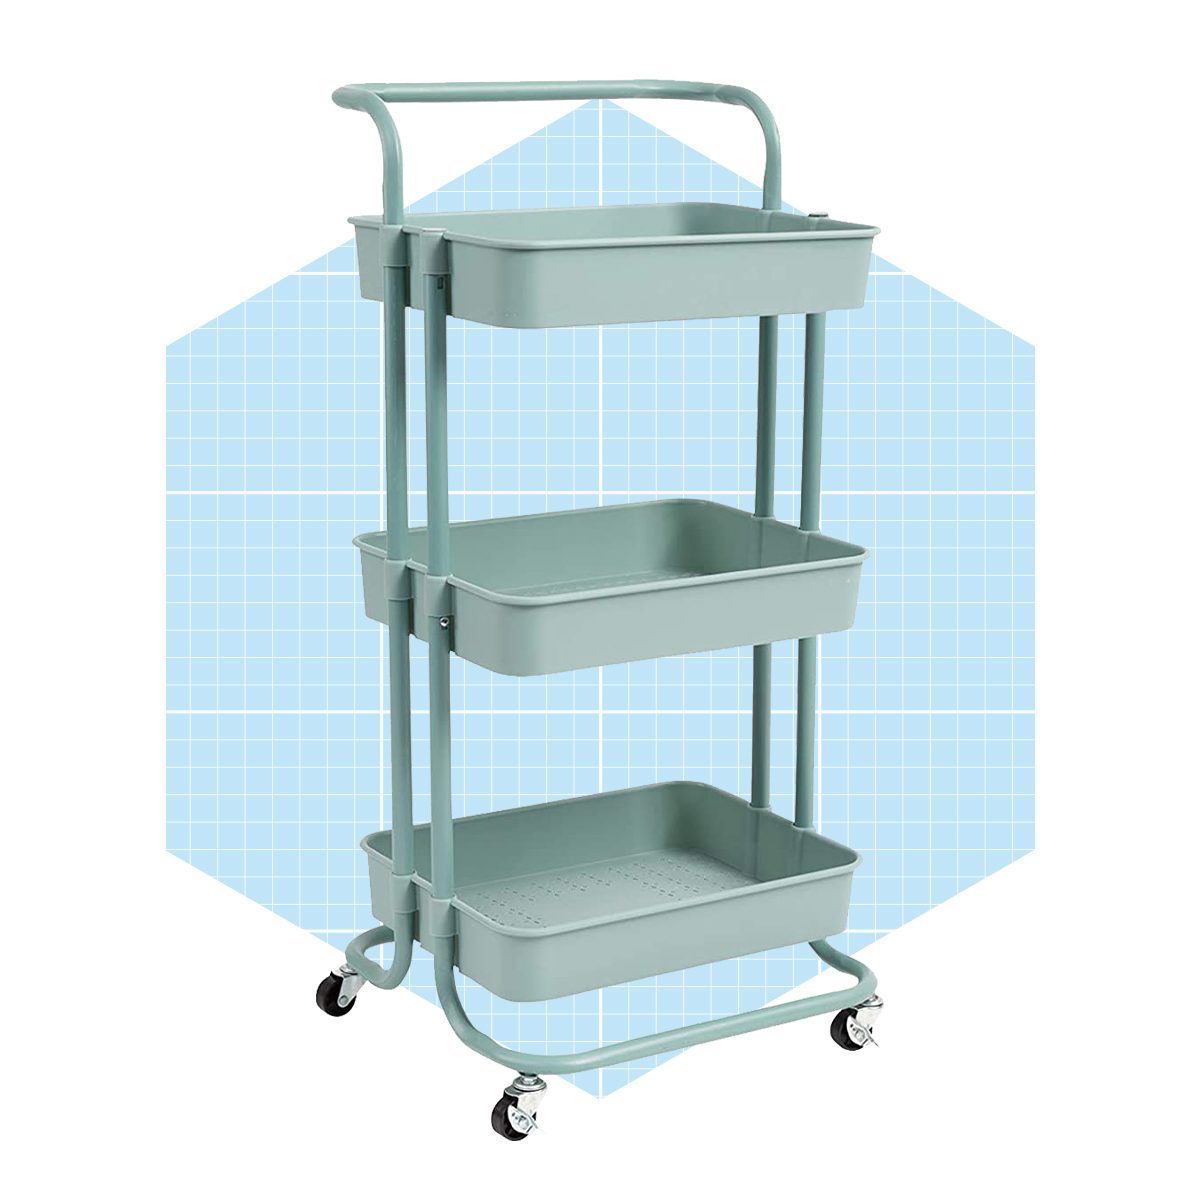 https://www.familyhandyman.com/wp-content/uploads/2021/06/danpinera-3-Tier-Rolling-Utility-Cart-with-Wheels-and-Handle-Storage-Organization-Shelves-for-Kitchen-and-Bathroom-ecomm-amazon.com_.jpg?fit=700%2C700